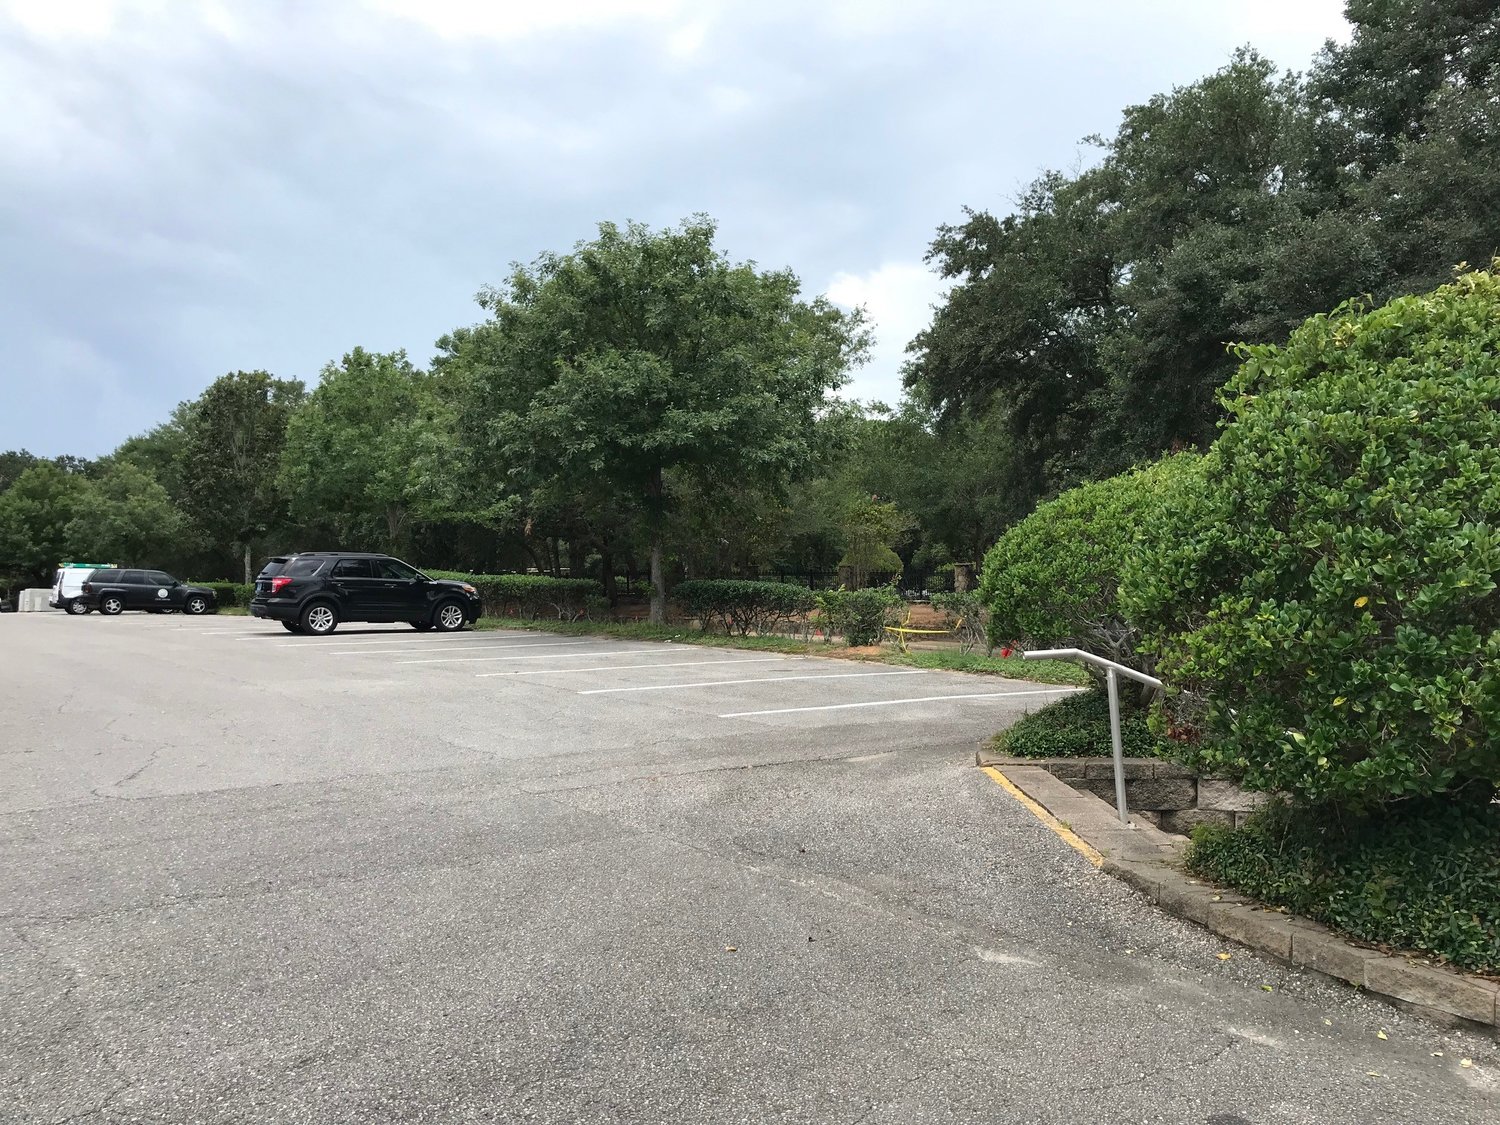 The Alabama Municipal Electric plans to build a solar canopy over eight parking spots in the northeast corner of the Fairhope City Hall parking lot. The canopy will include 72 panels and generate 24 kilowatts of electricity.